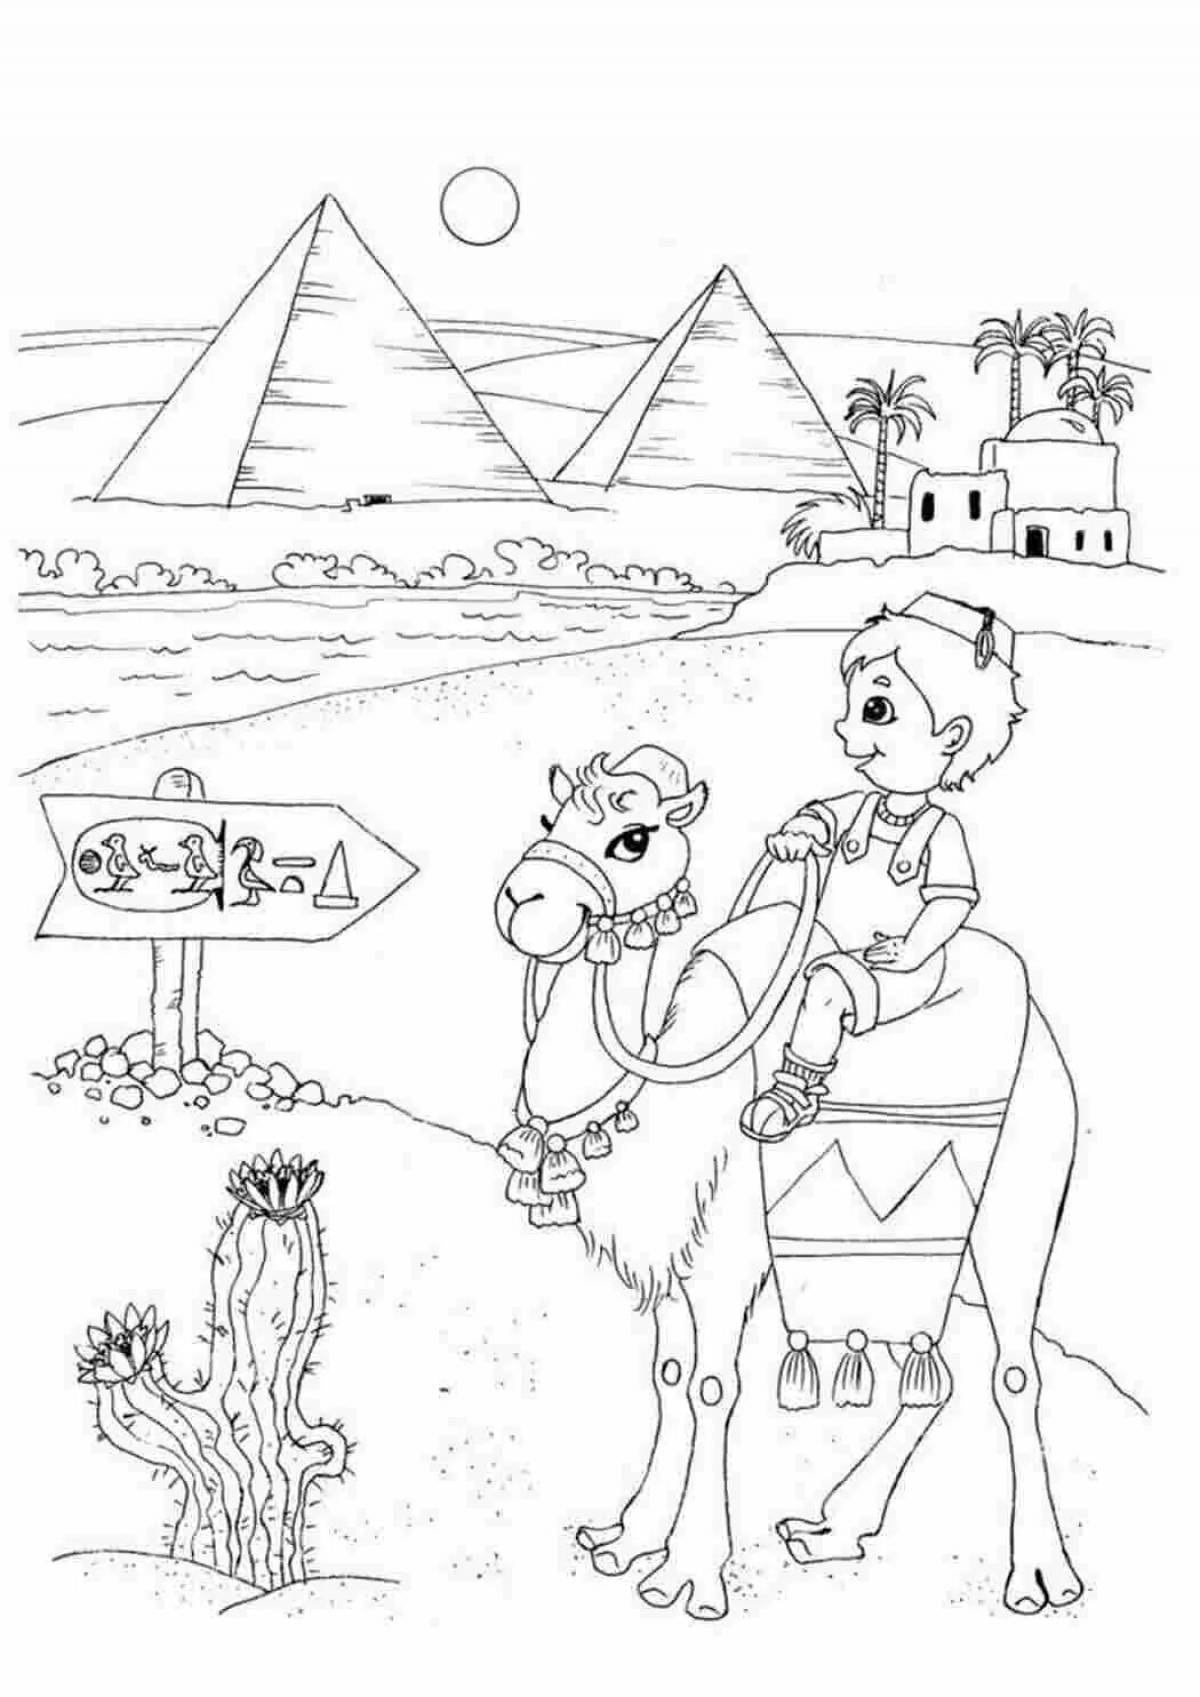 Dazzling travel coloring pages for kids